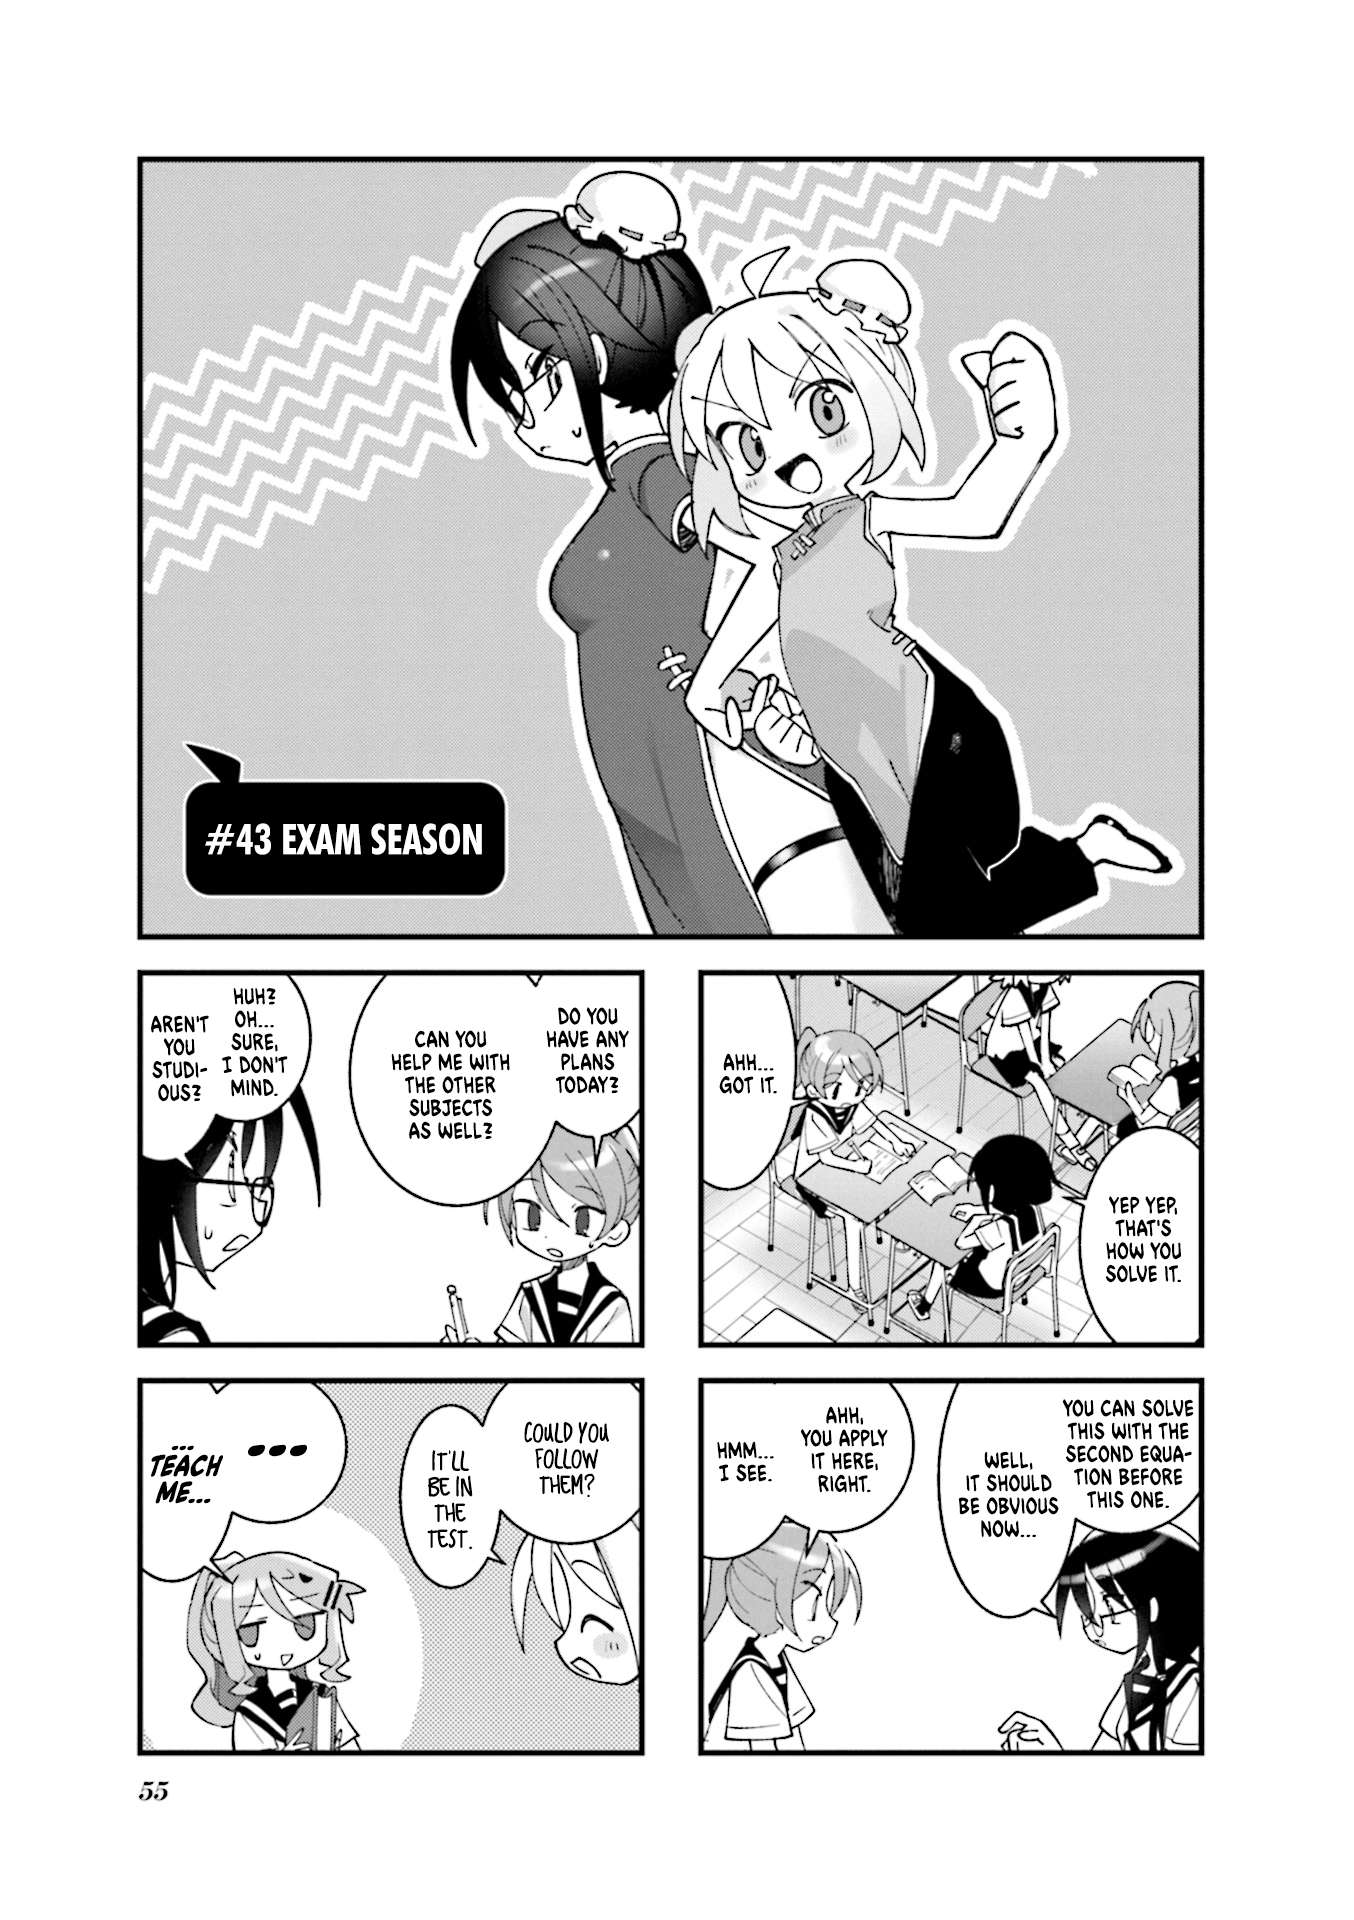 Null Meta - chapter 43 - #1